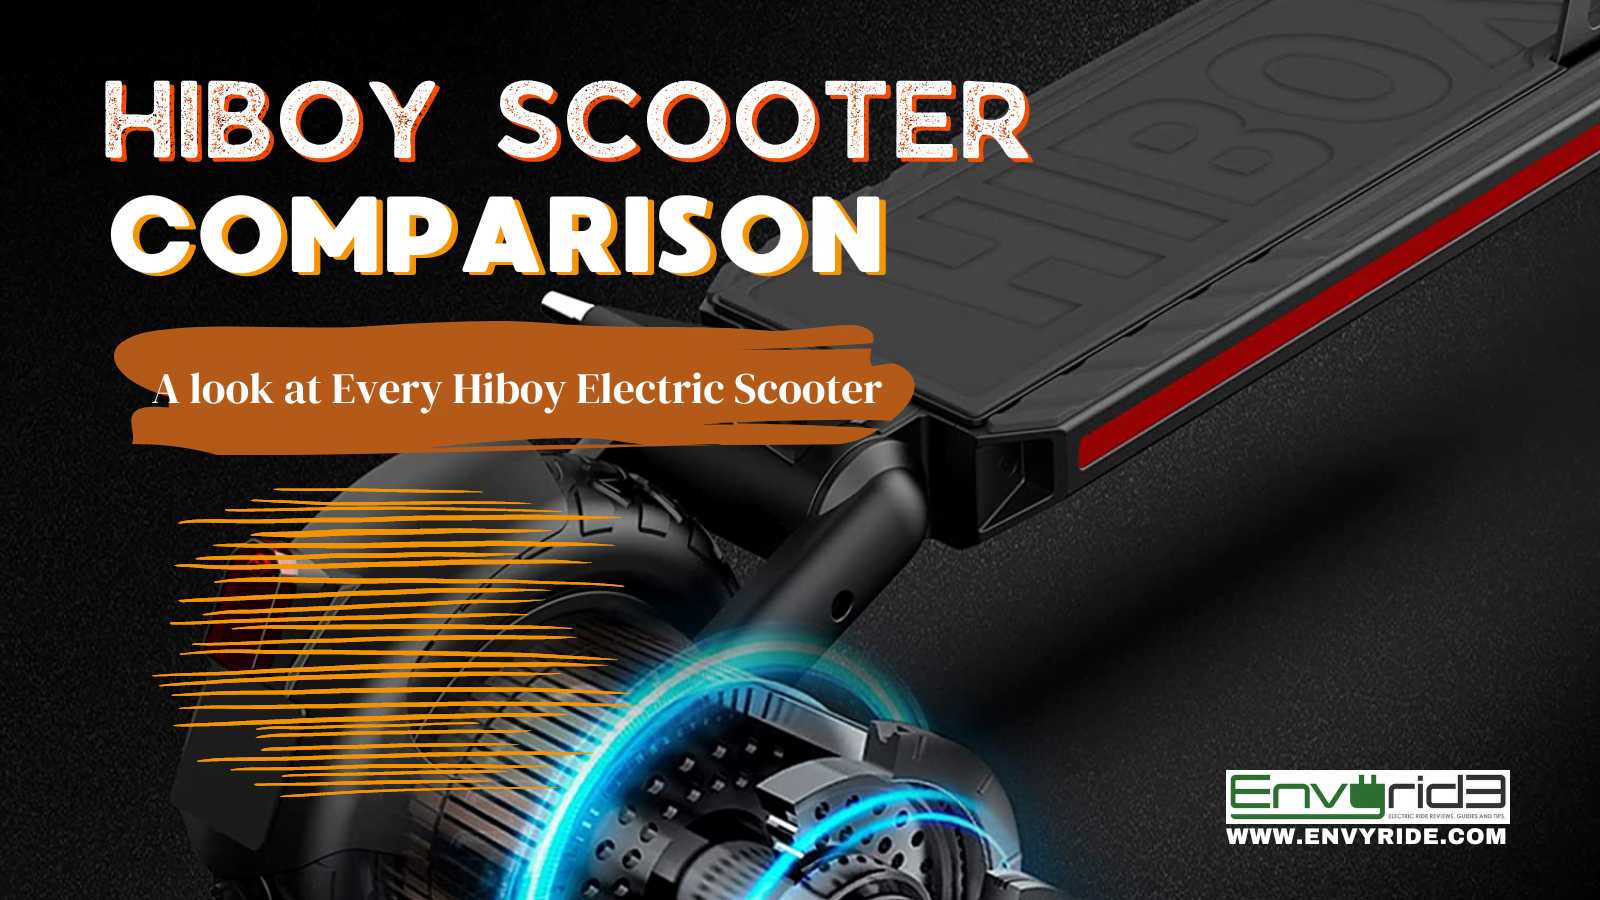 Hiboy Scooter 